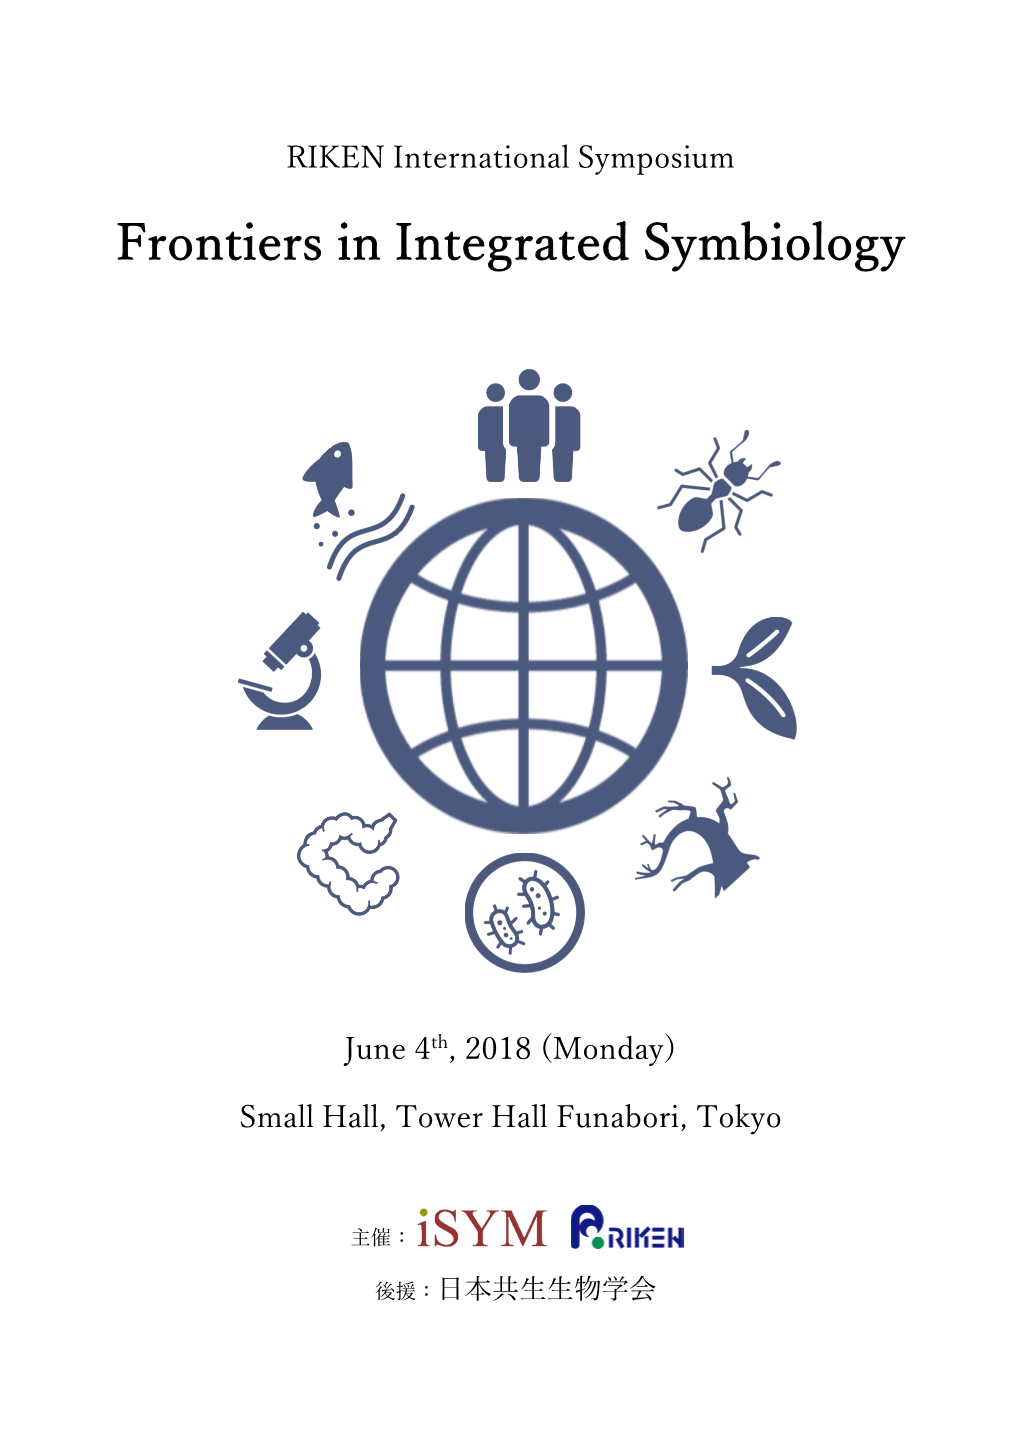 Frontiers in Integrated Symbiology